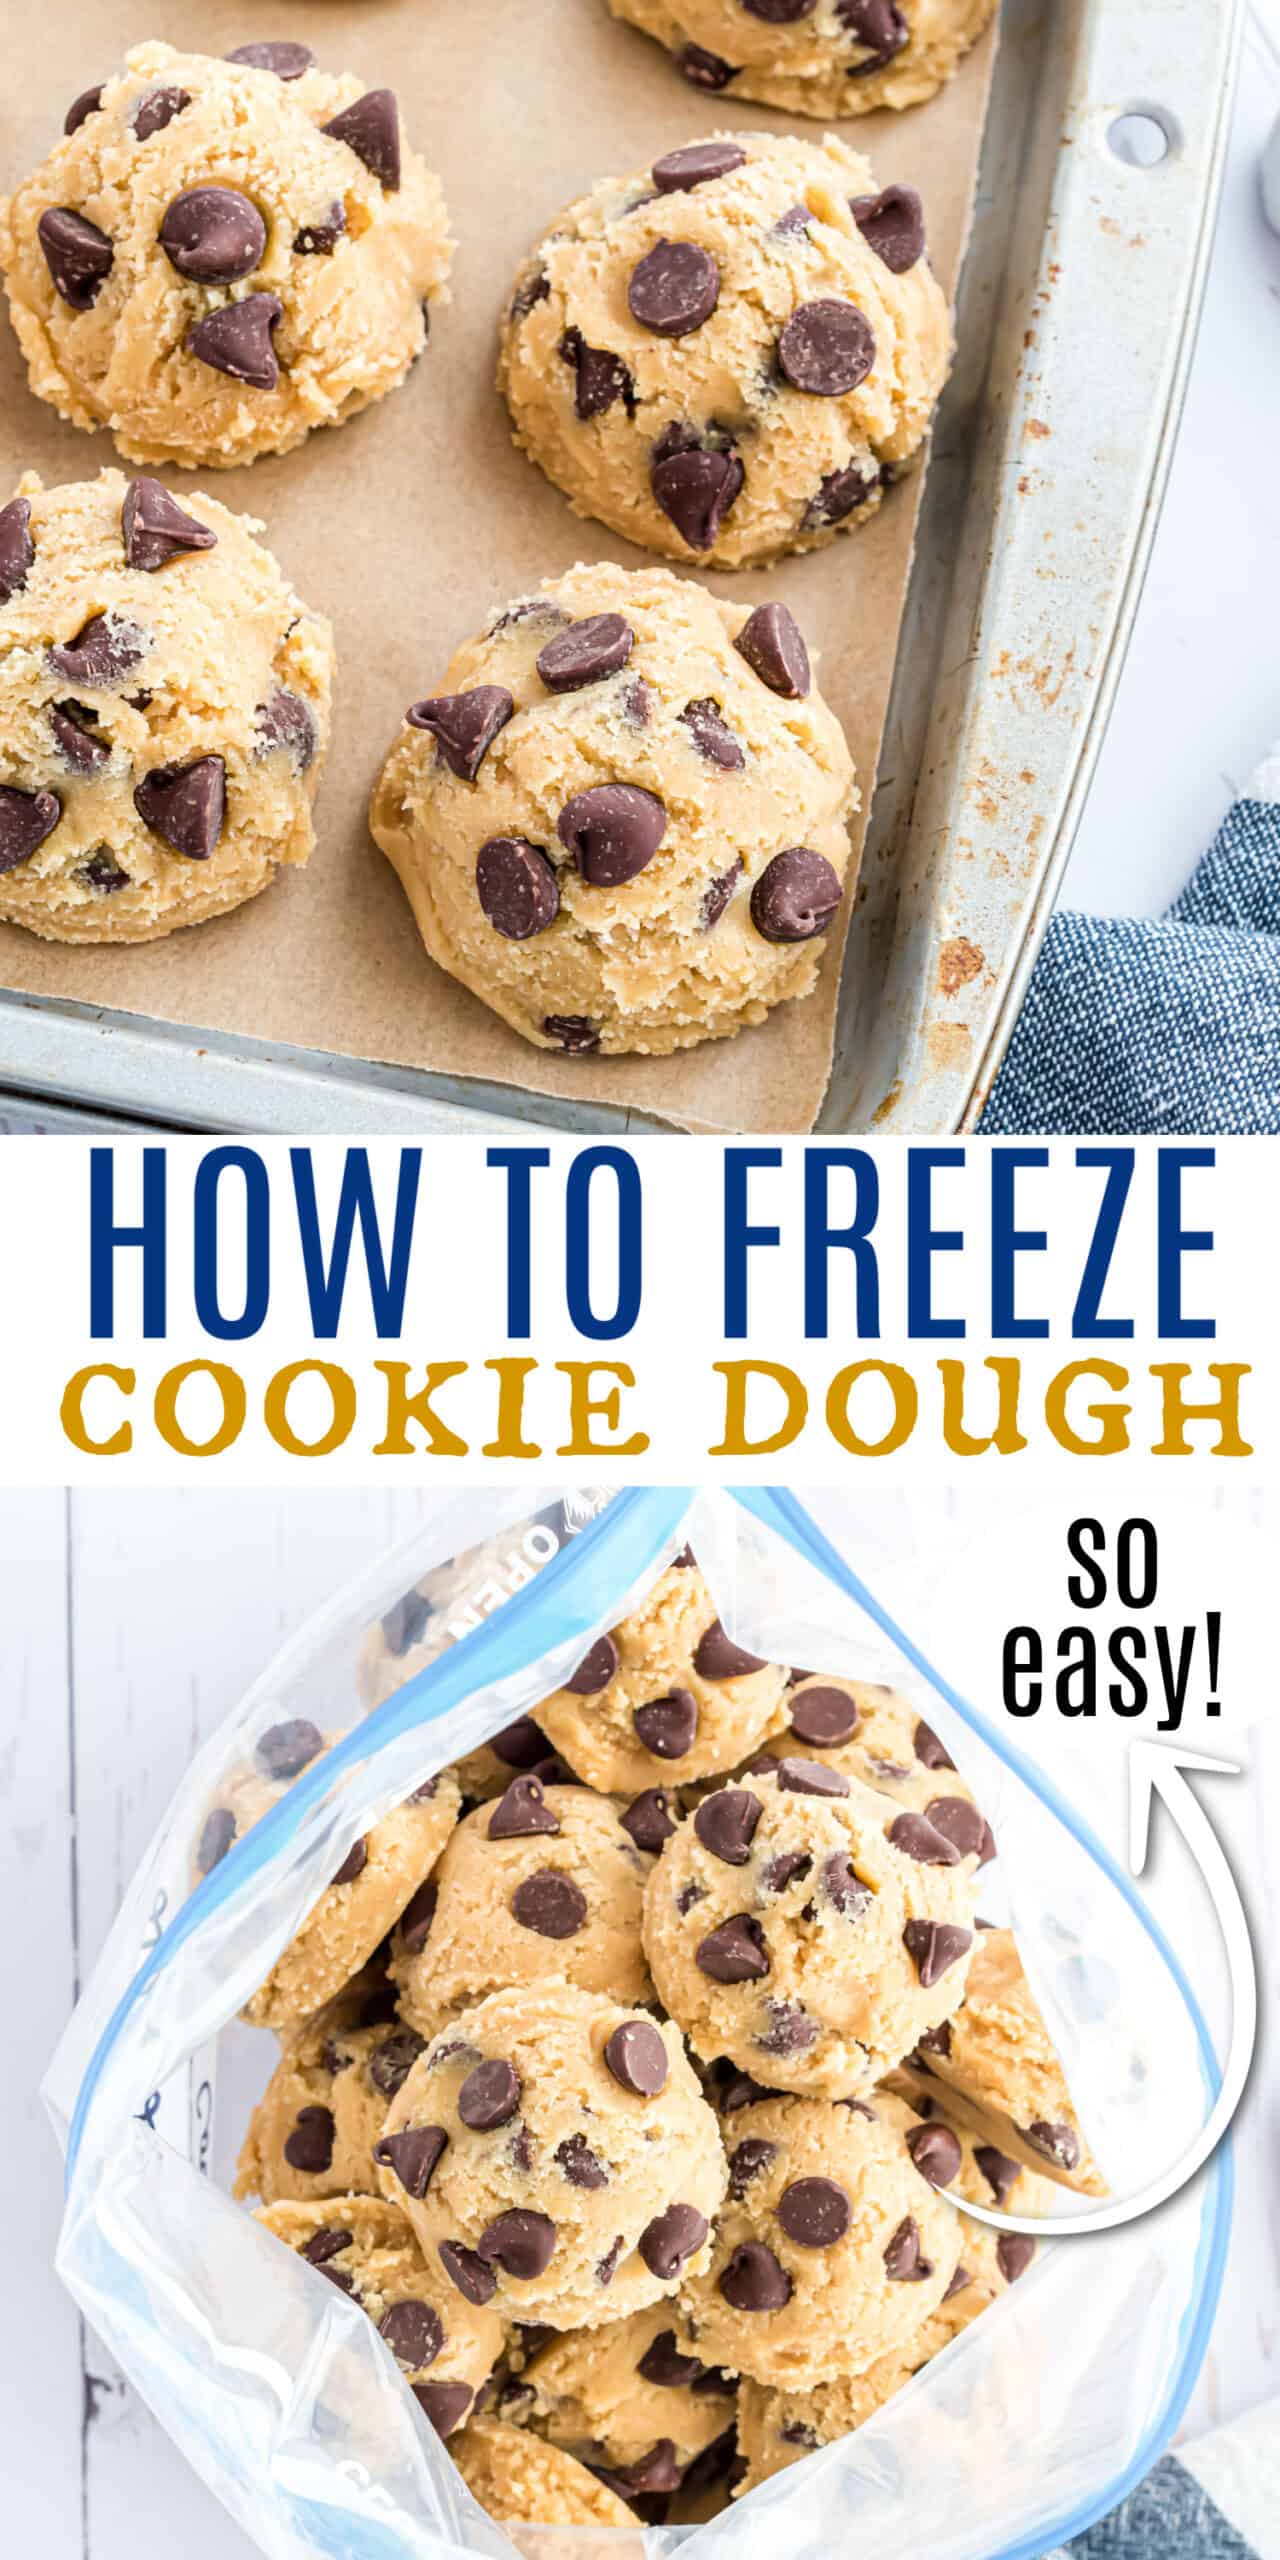 https://www.shugarysweets.com/wp-content/uploads/2022/04/how-to-cookie-dough-pin-scaled.jpg